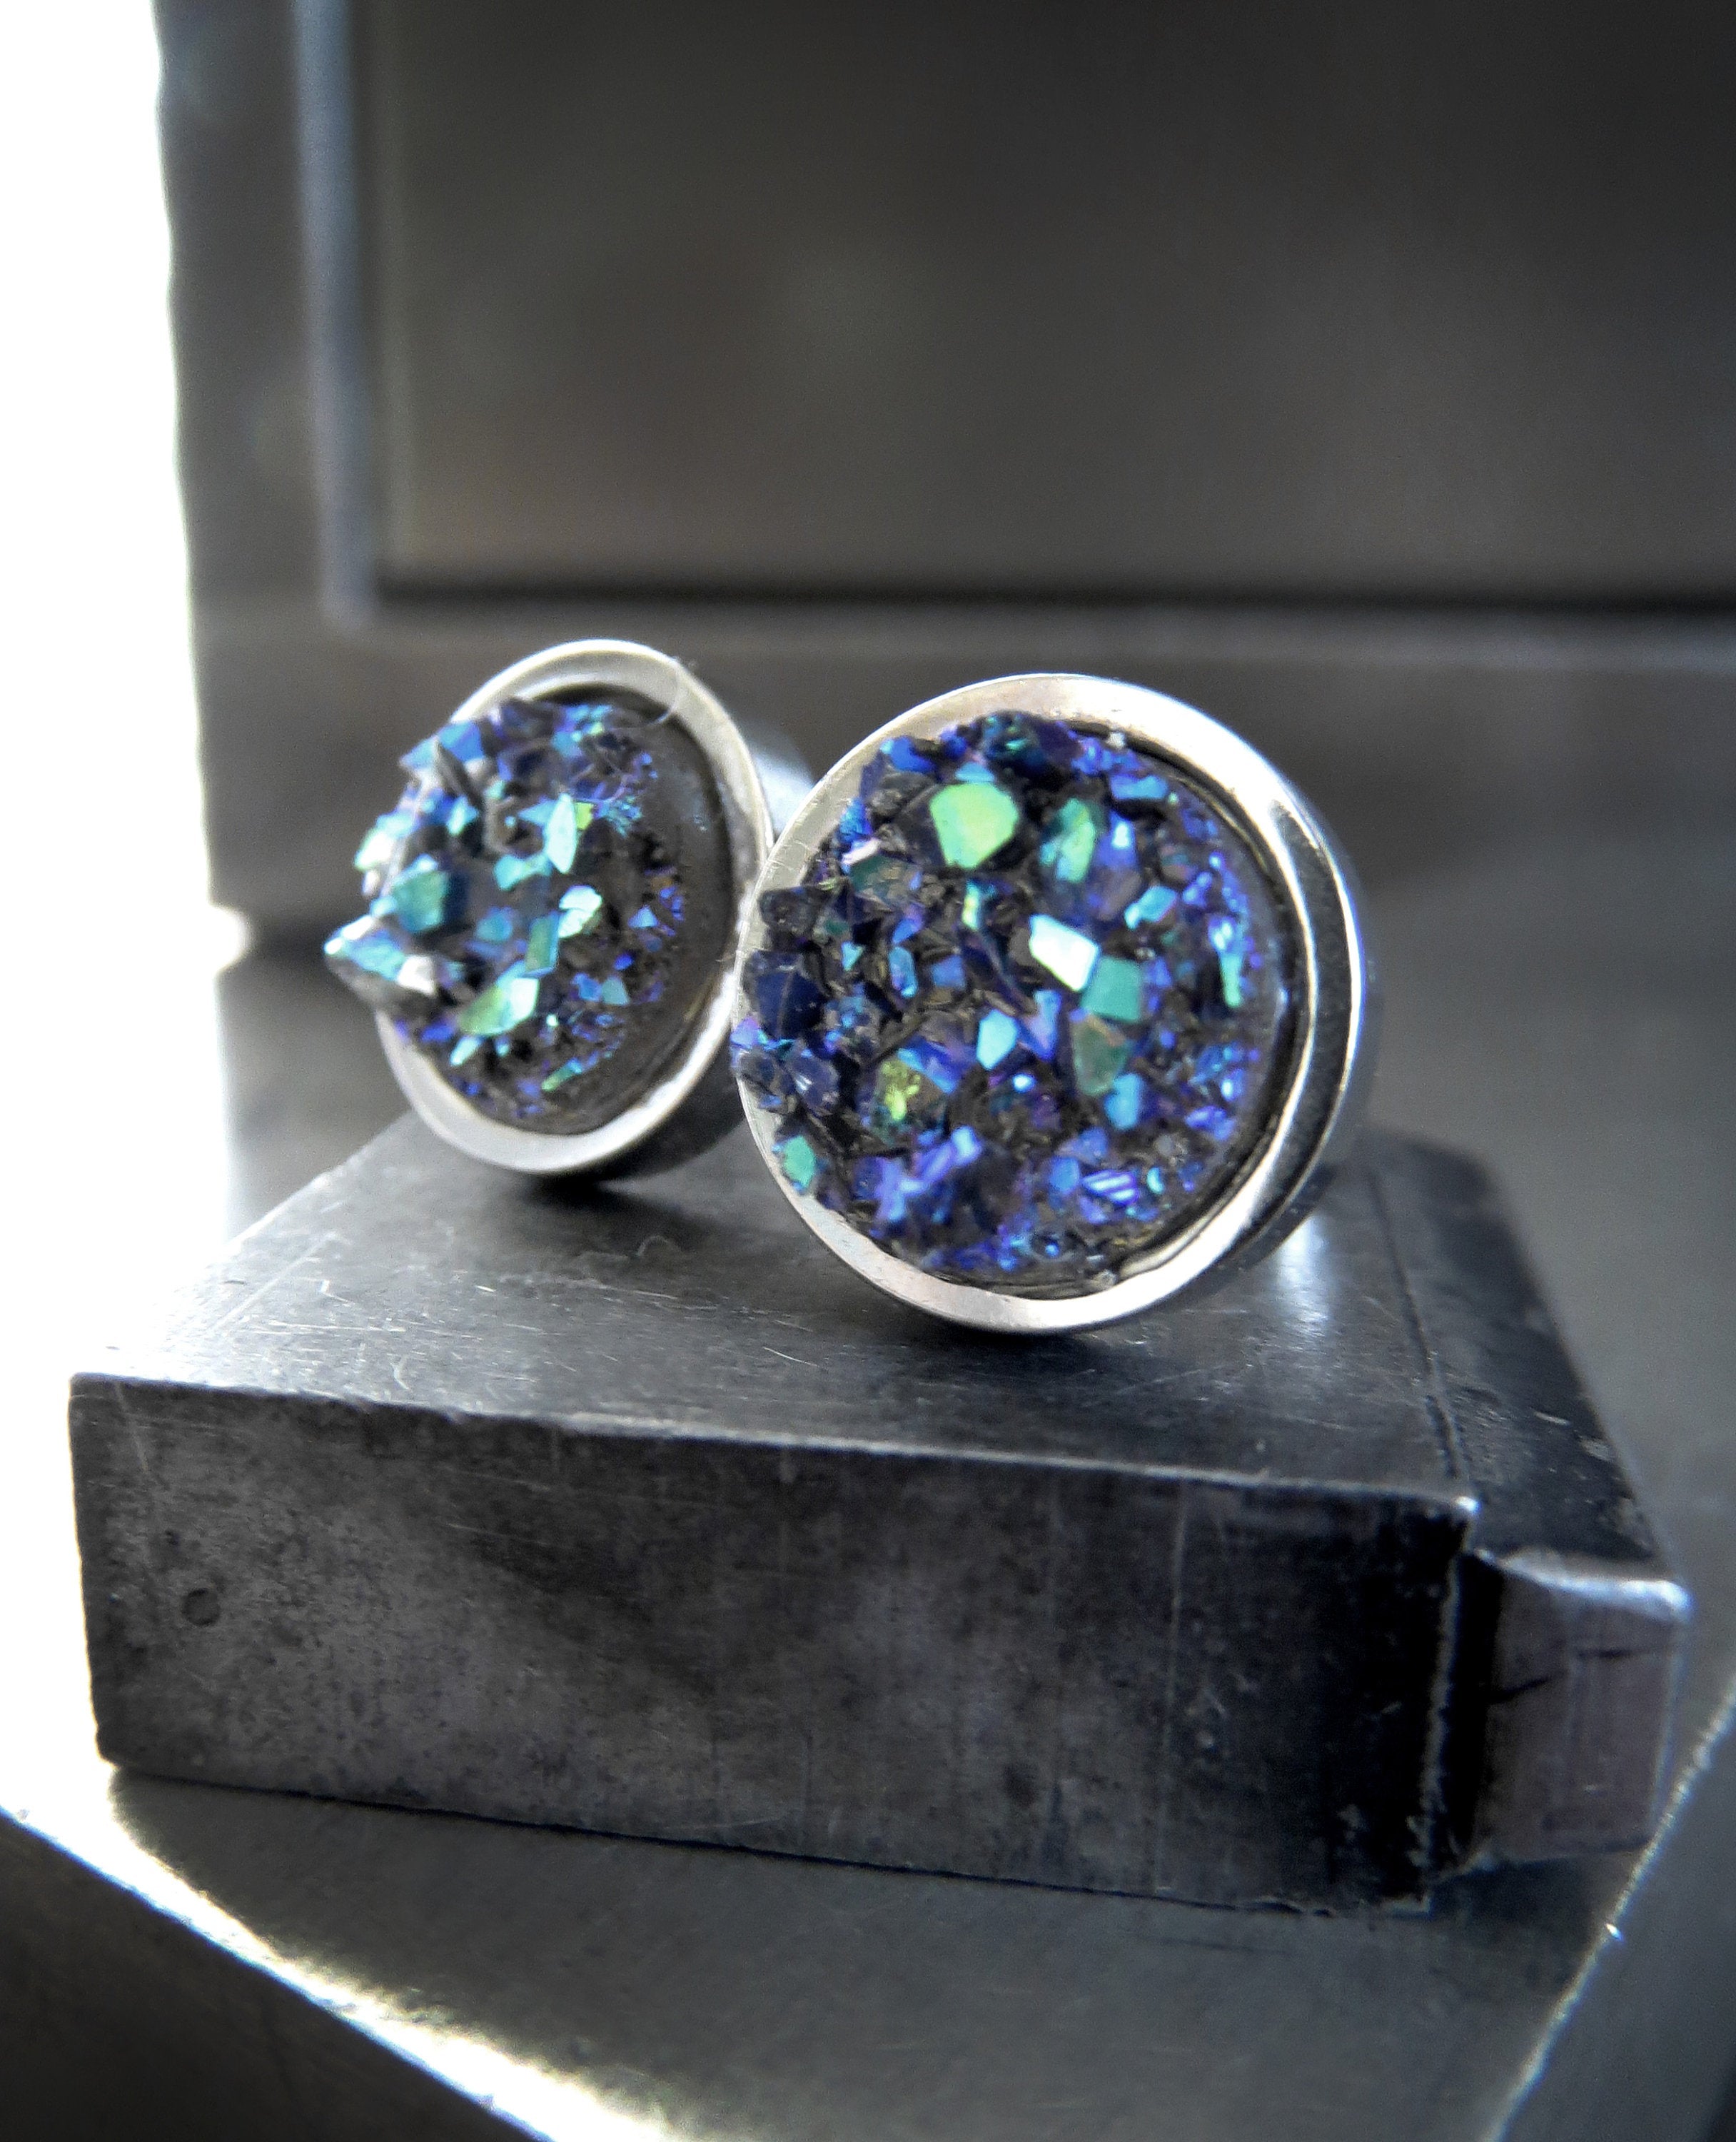 COLD AS ICE - Shimmer Blue Green Iridescent Stud Earrings with Grey Simulated Druzy - Unisex Womens Mens Large Stud Earrings, Modern Jewelry